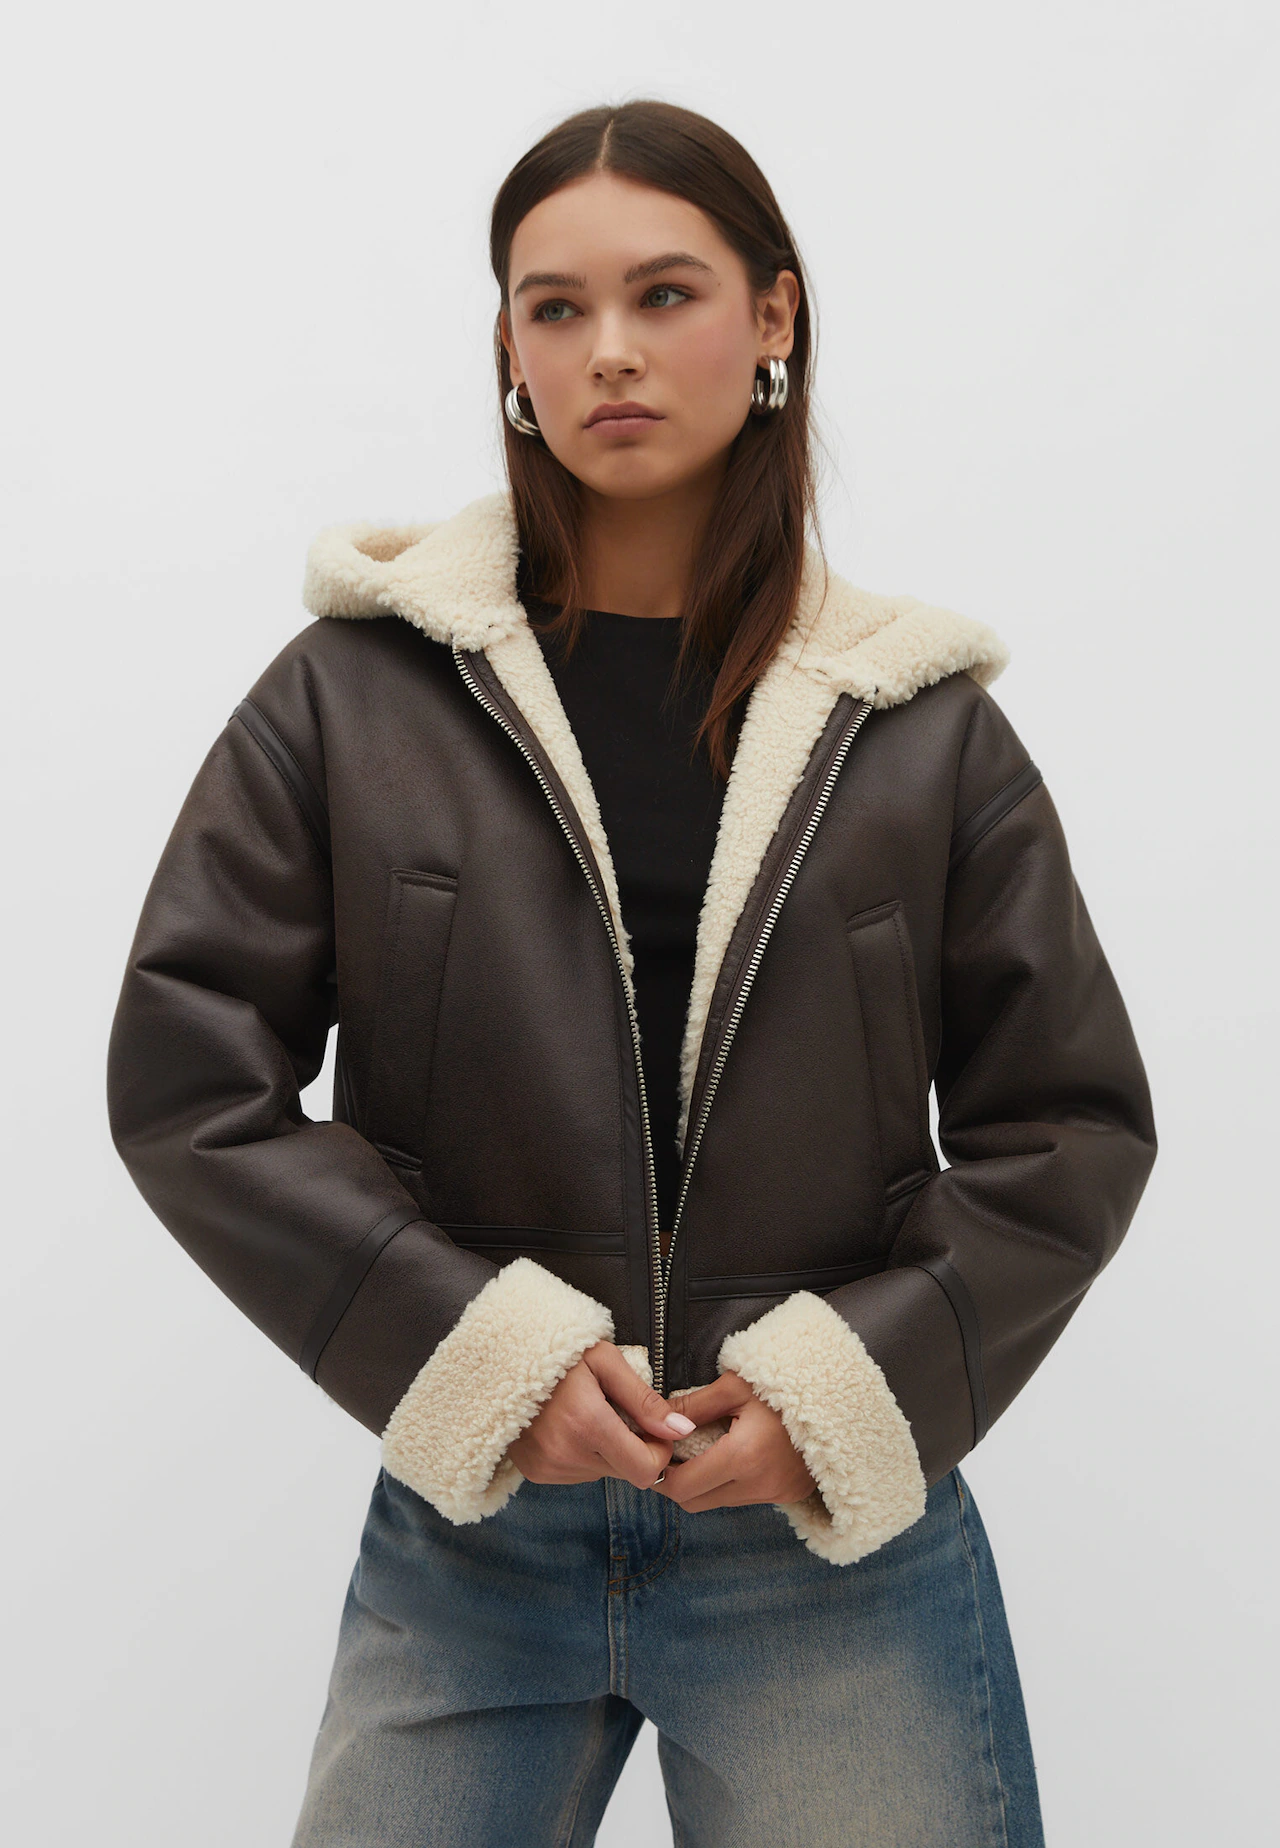 Double-faced aviator jacket with hood - Women's fashion